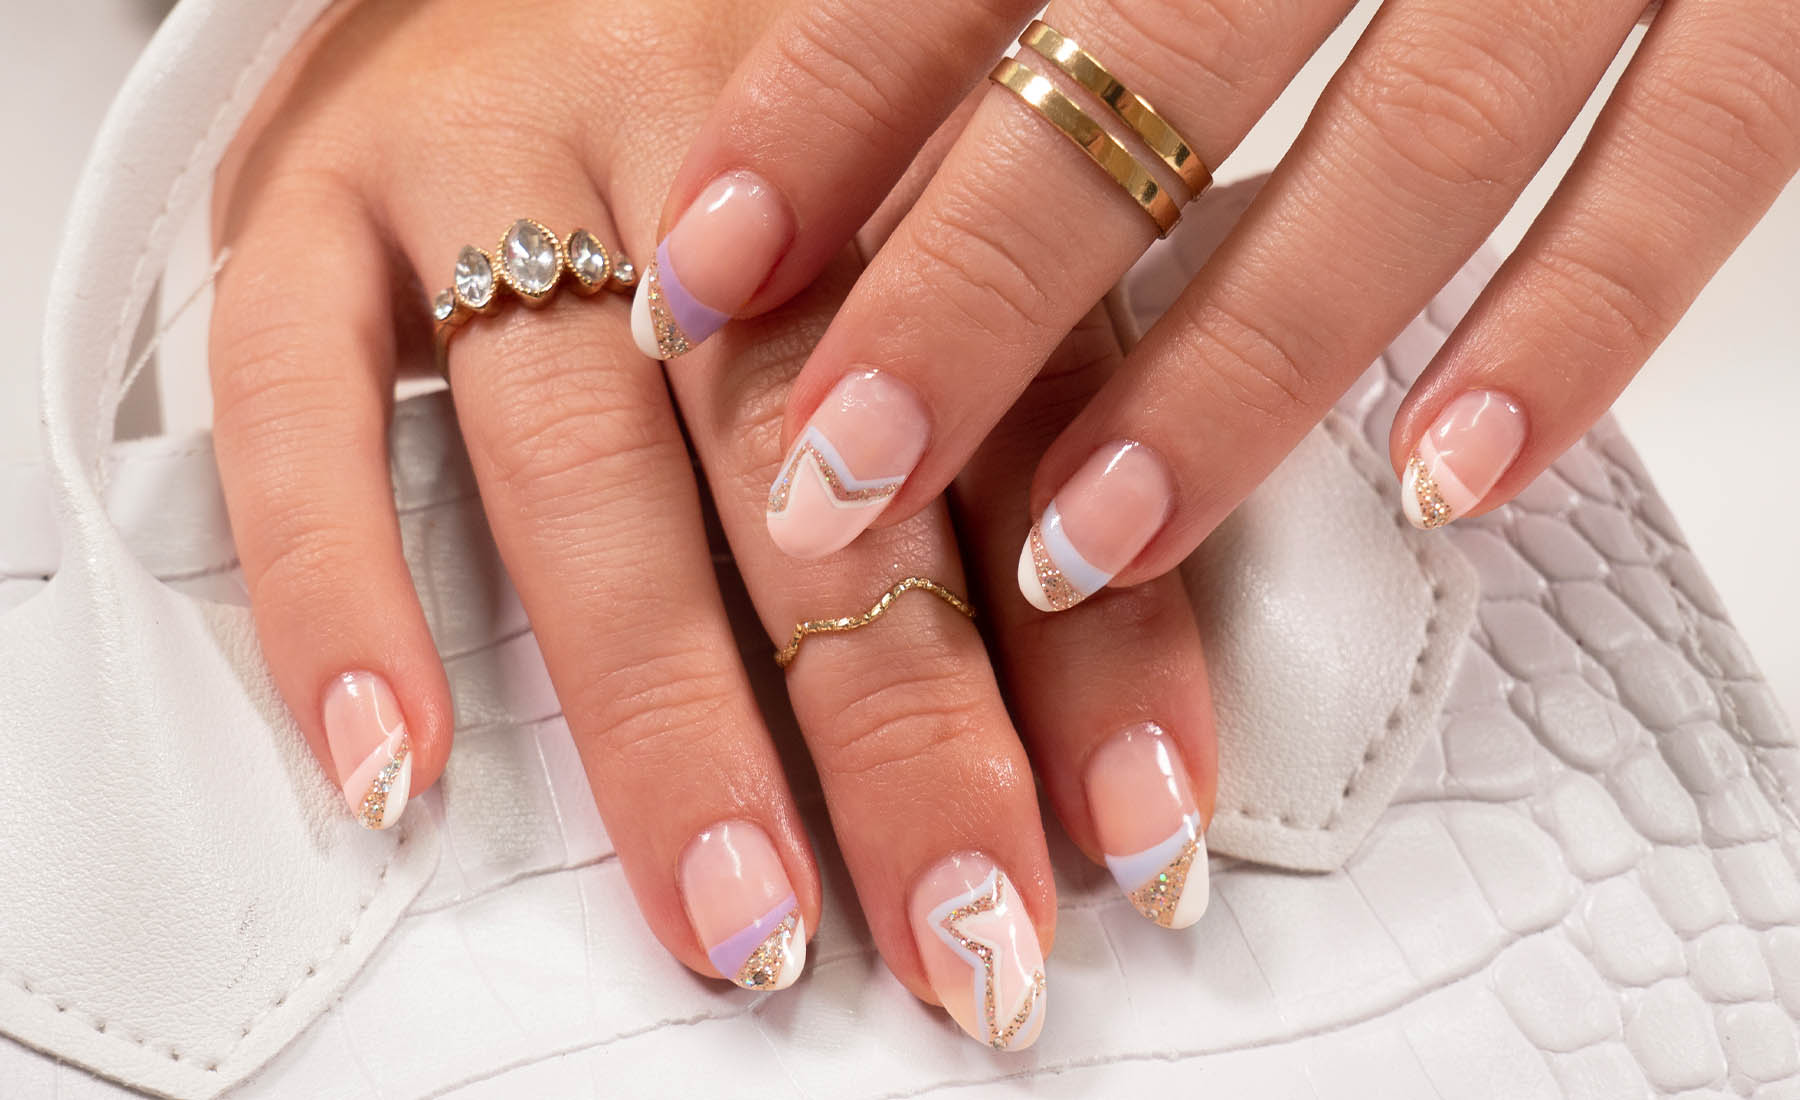 New Year's Nails: The Top Gel Nail Art Looks to Ring in 2023